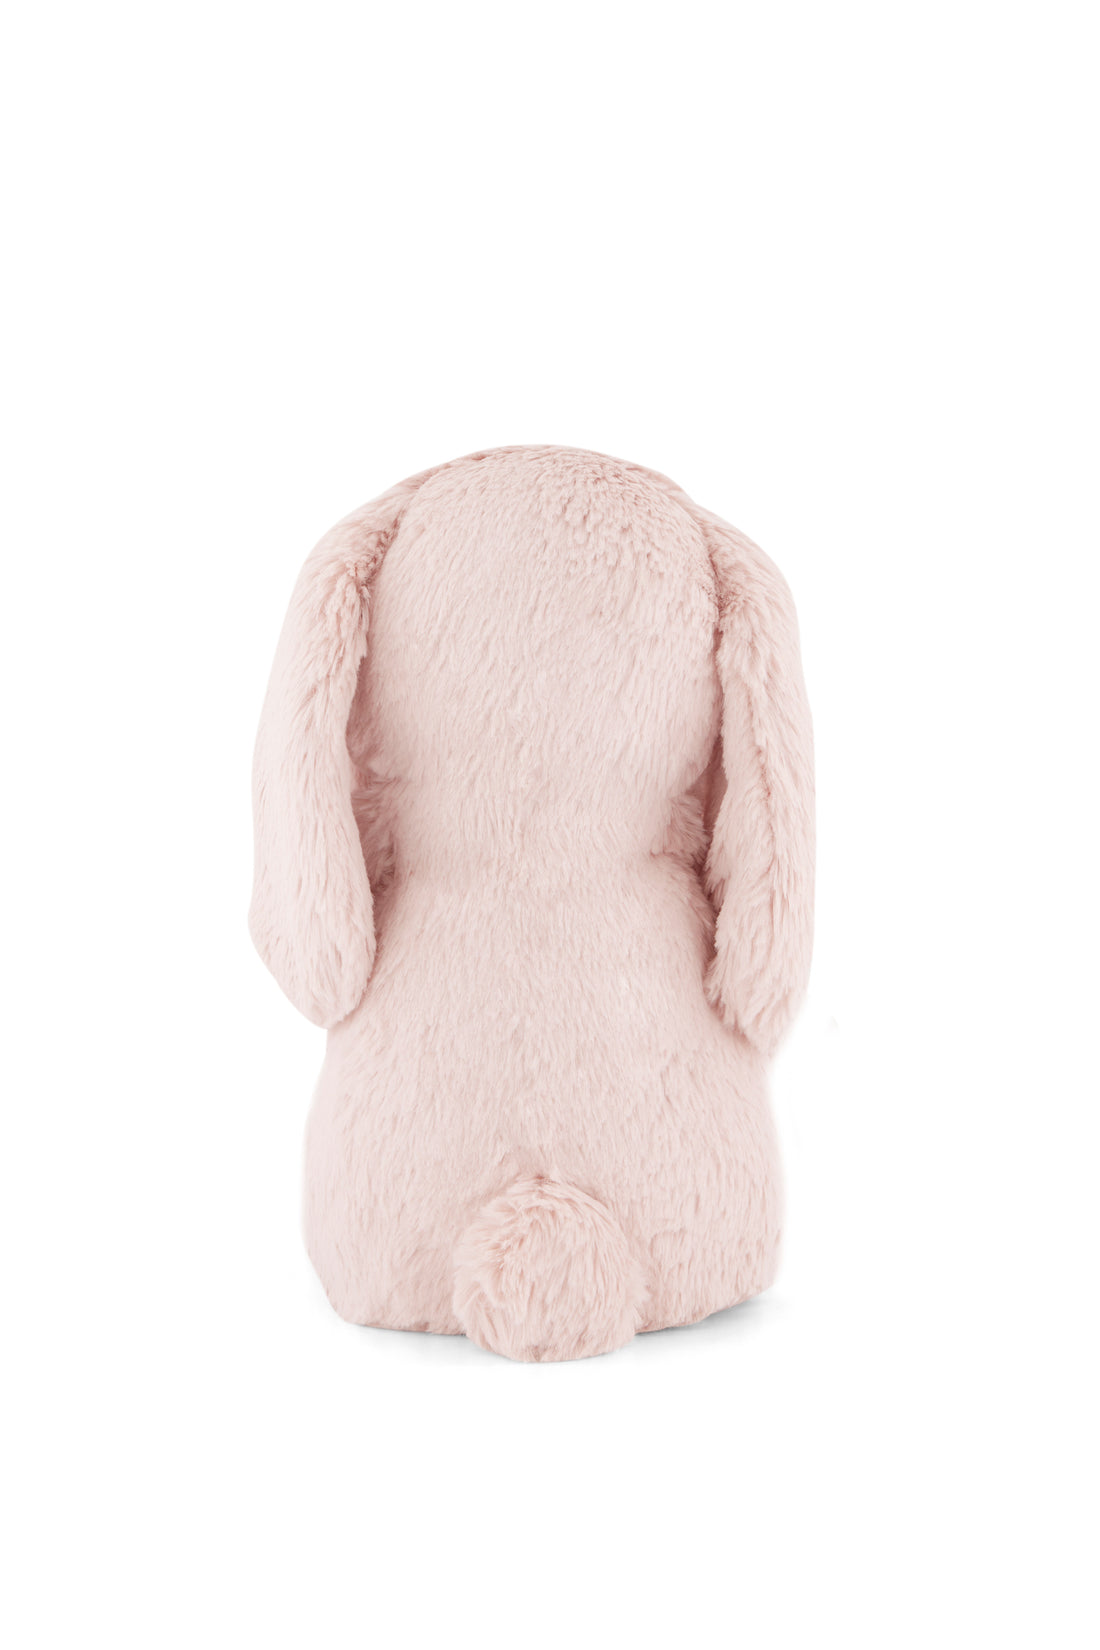 Snuggle Bunnies - Frankie the Hugging Bunny - Blush Childrens Toy from Jamie Kay NZ